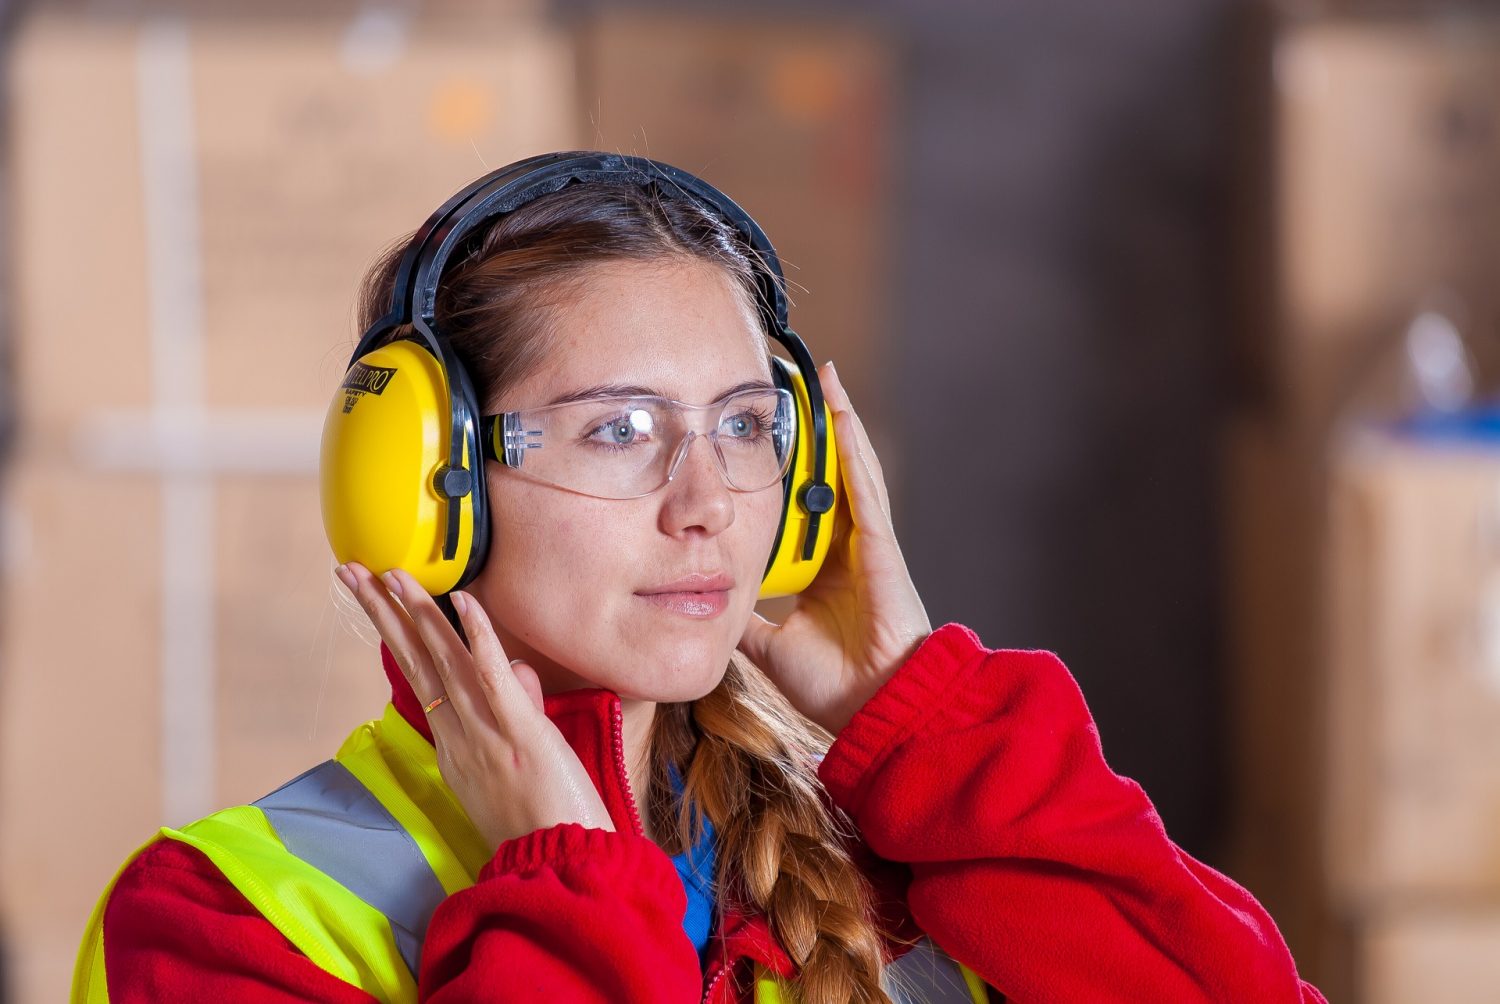 When should an employee be provided with safety clothing?